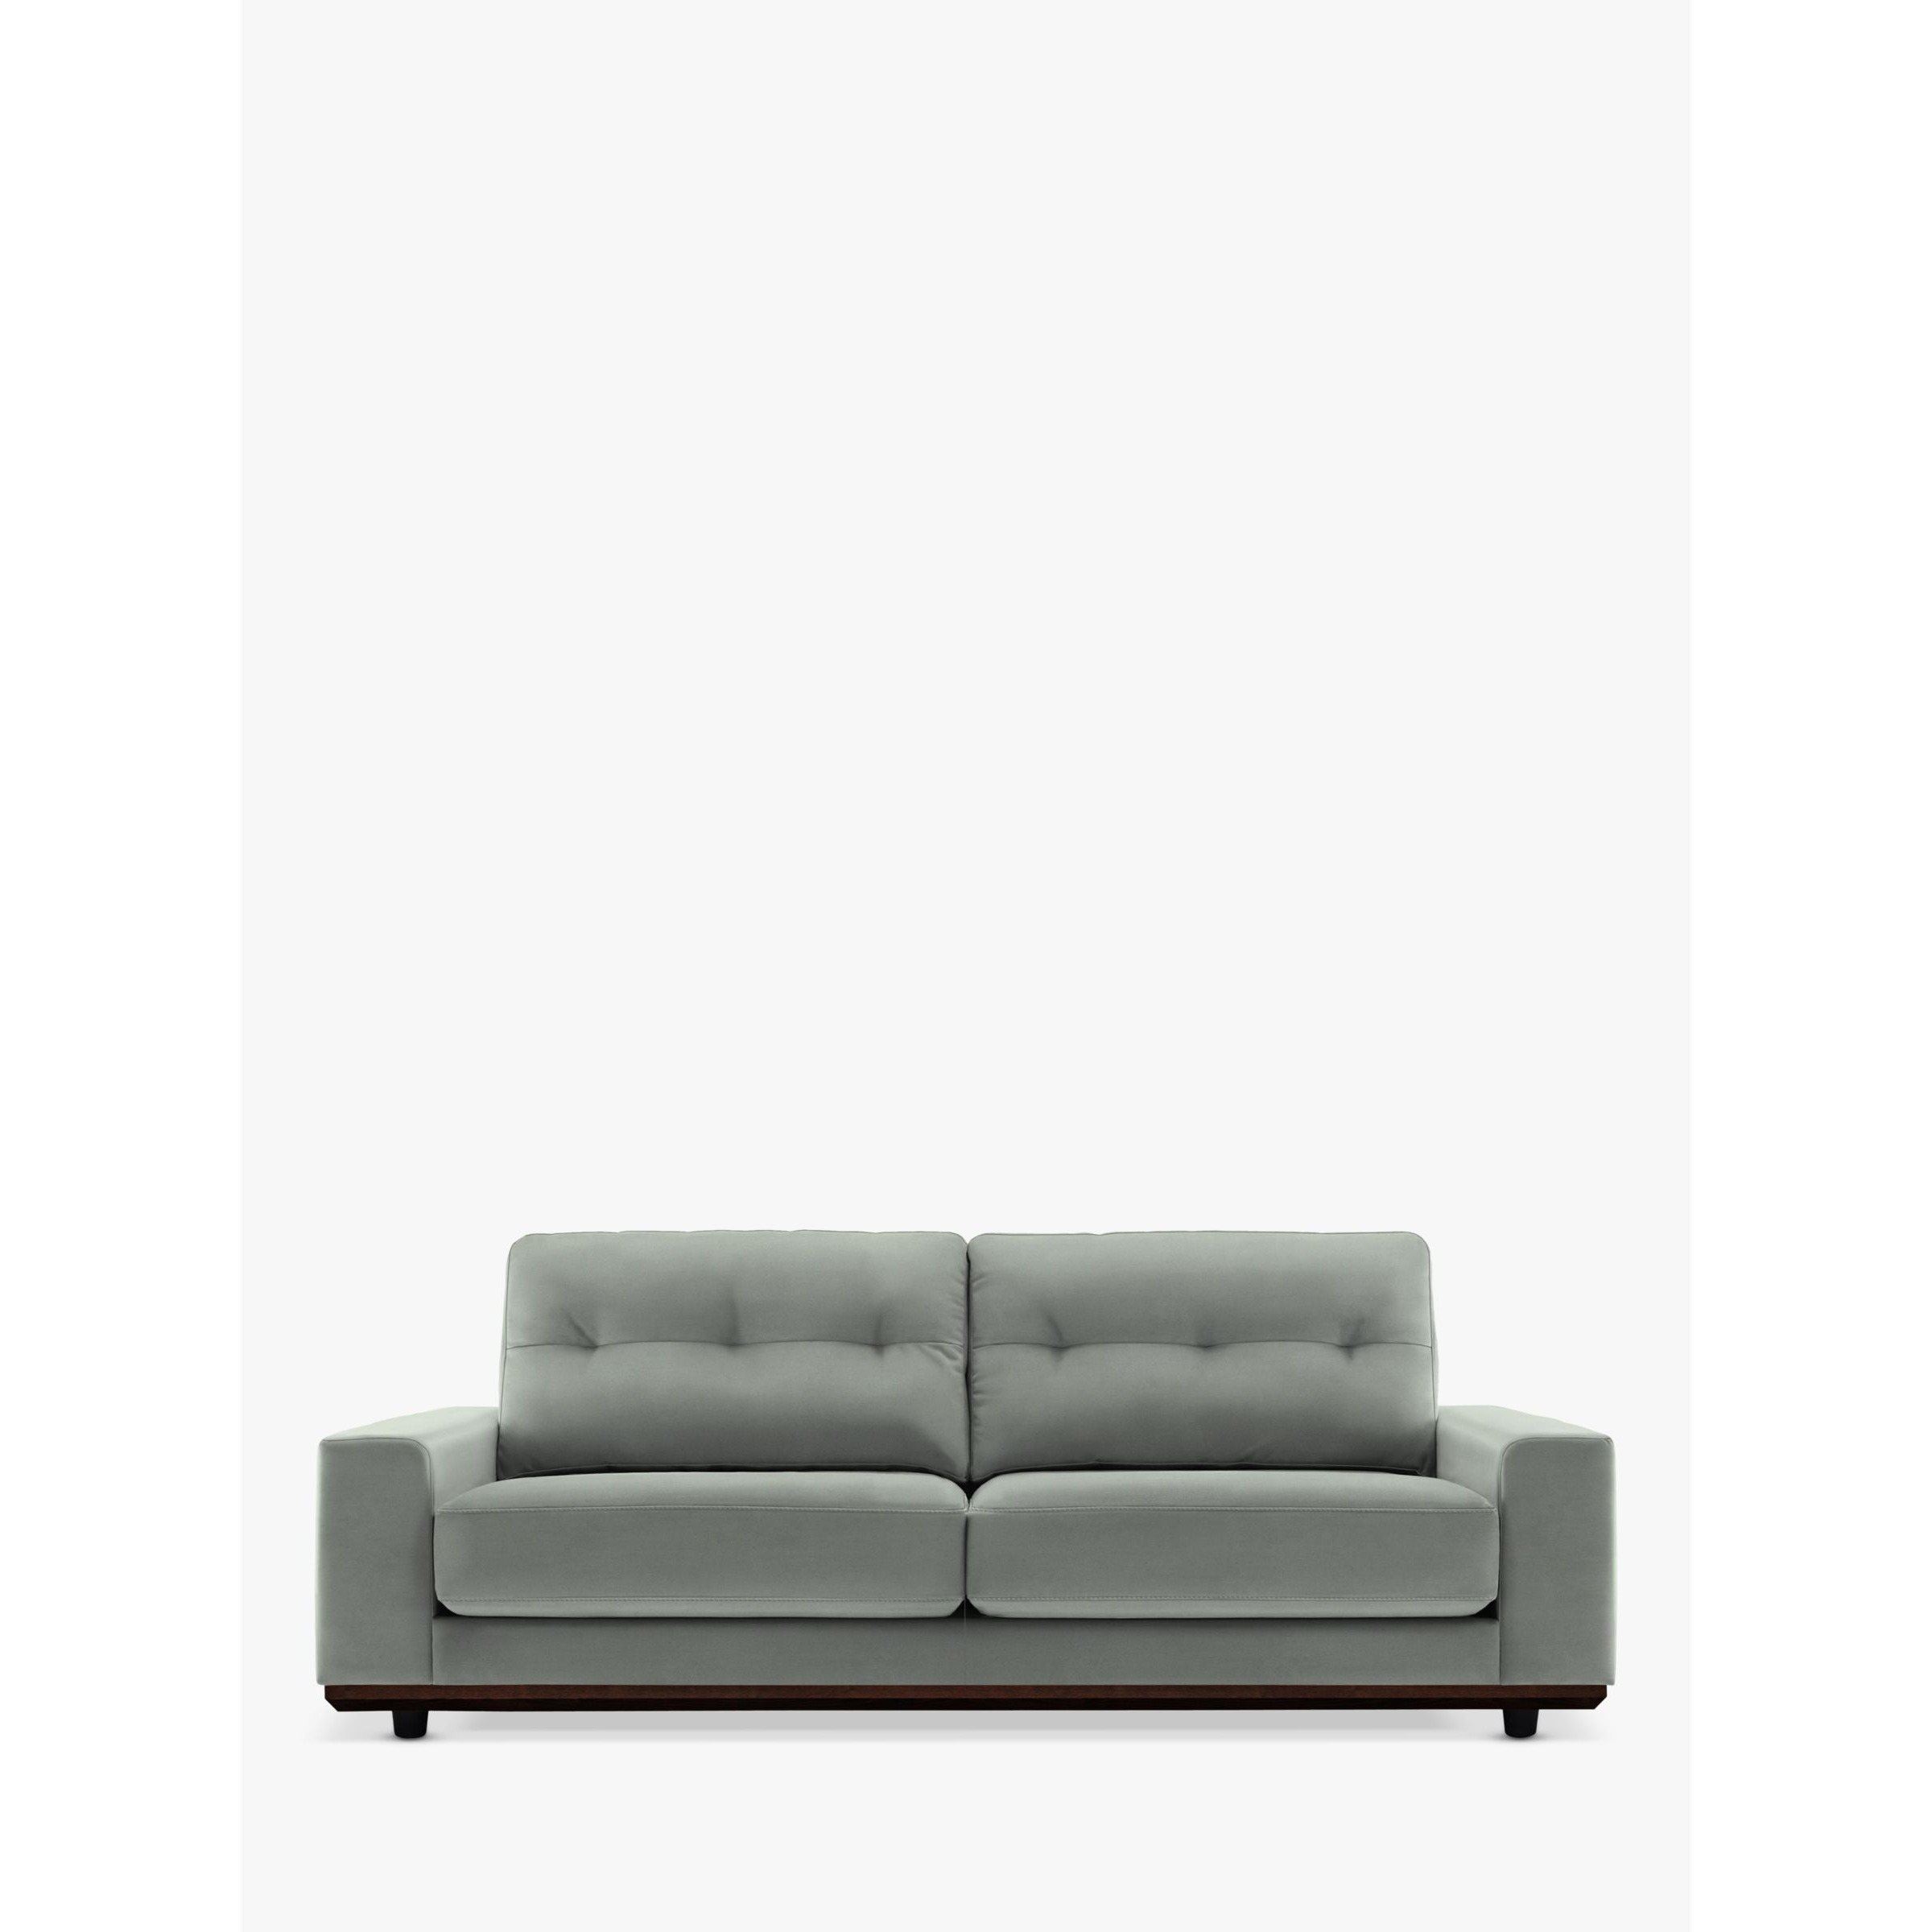 G Plan Vintage The Seventy One Large 3 Seater Sofa - image 1